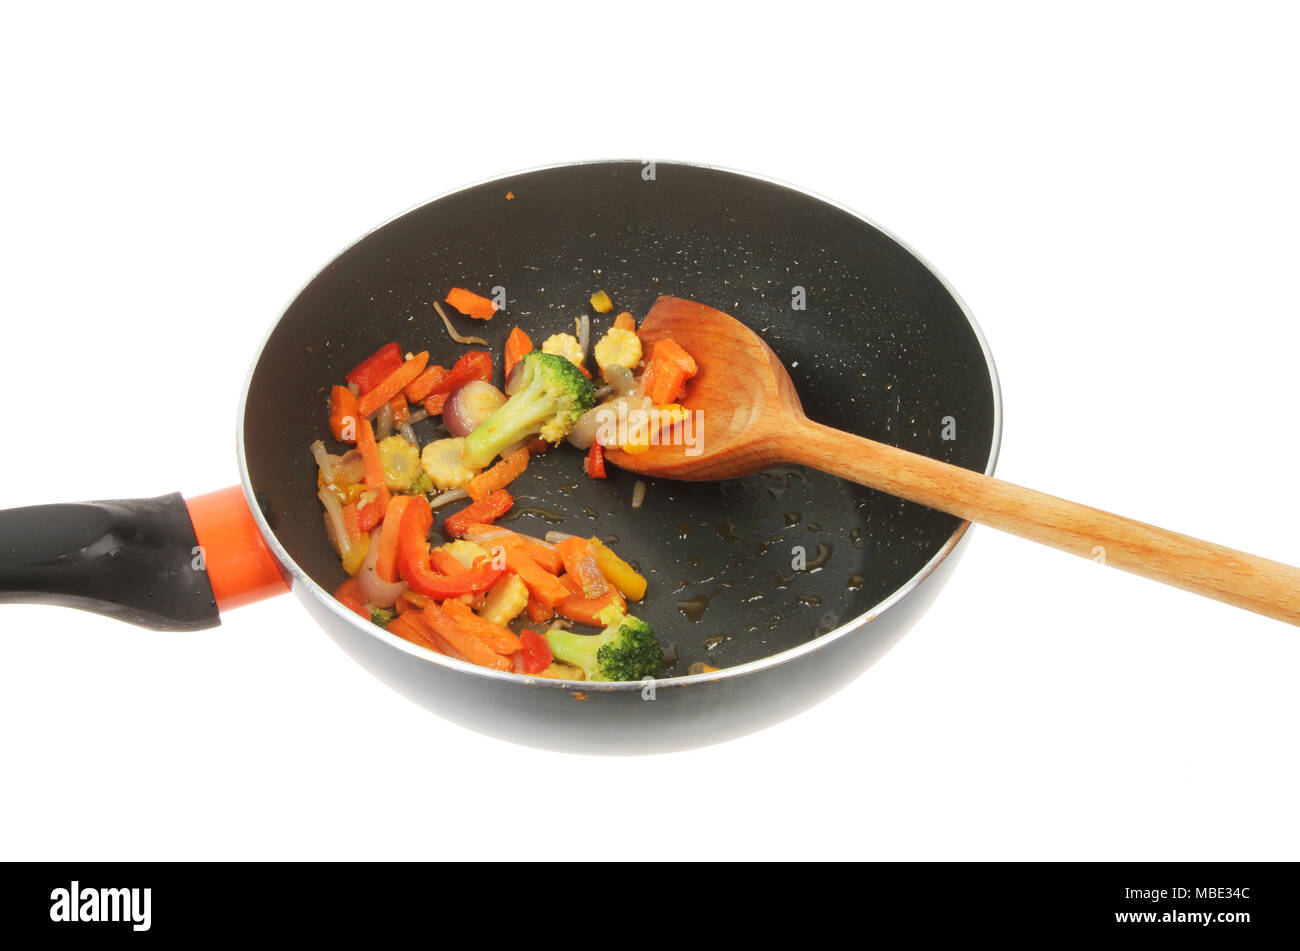 Stir fried vegetables with a wooden spoon in a wok isolated against white Stock Photo